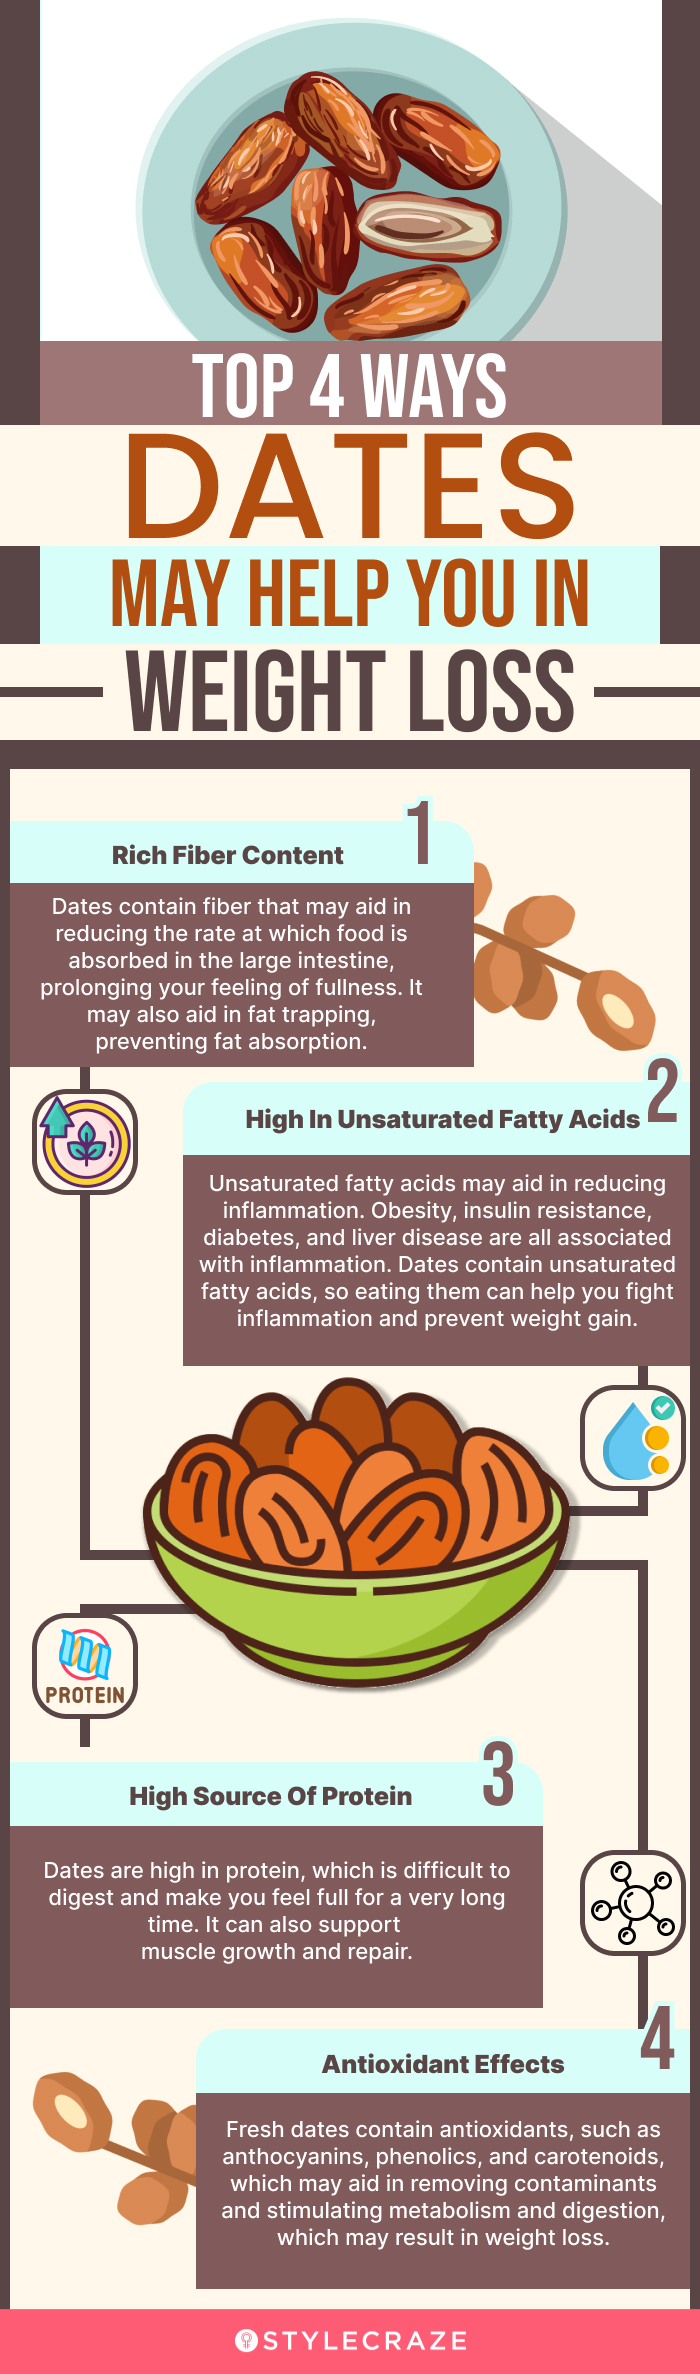 top 4 ways dates may help you in weight loss (infographic)